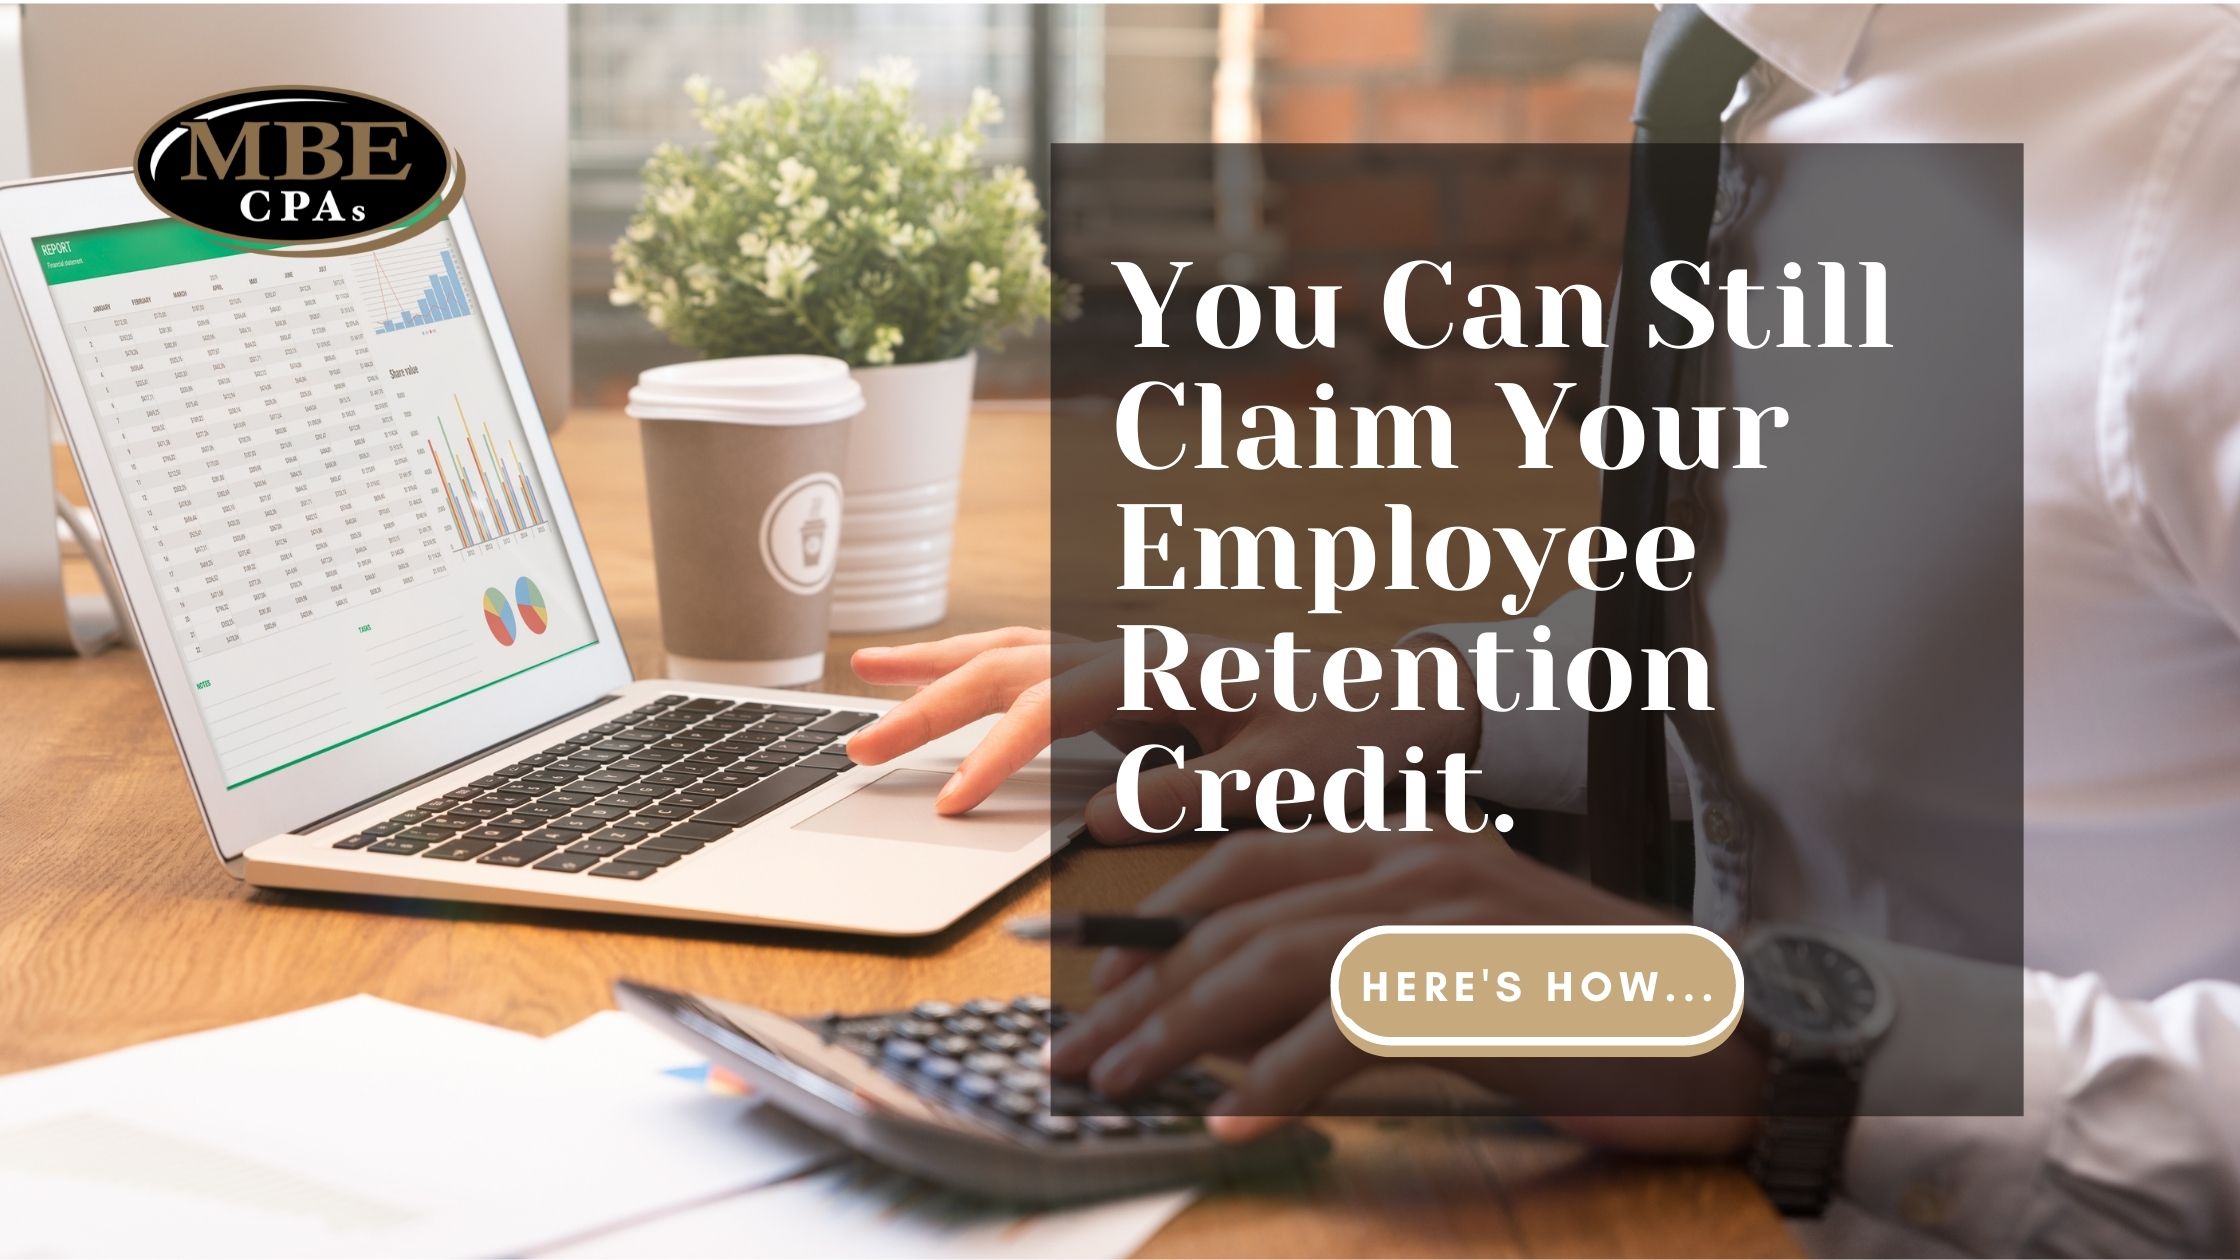 You Can Still Claim Your Employee Retention Credit